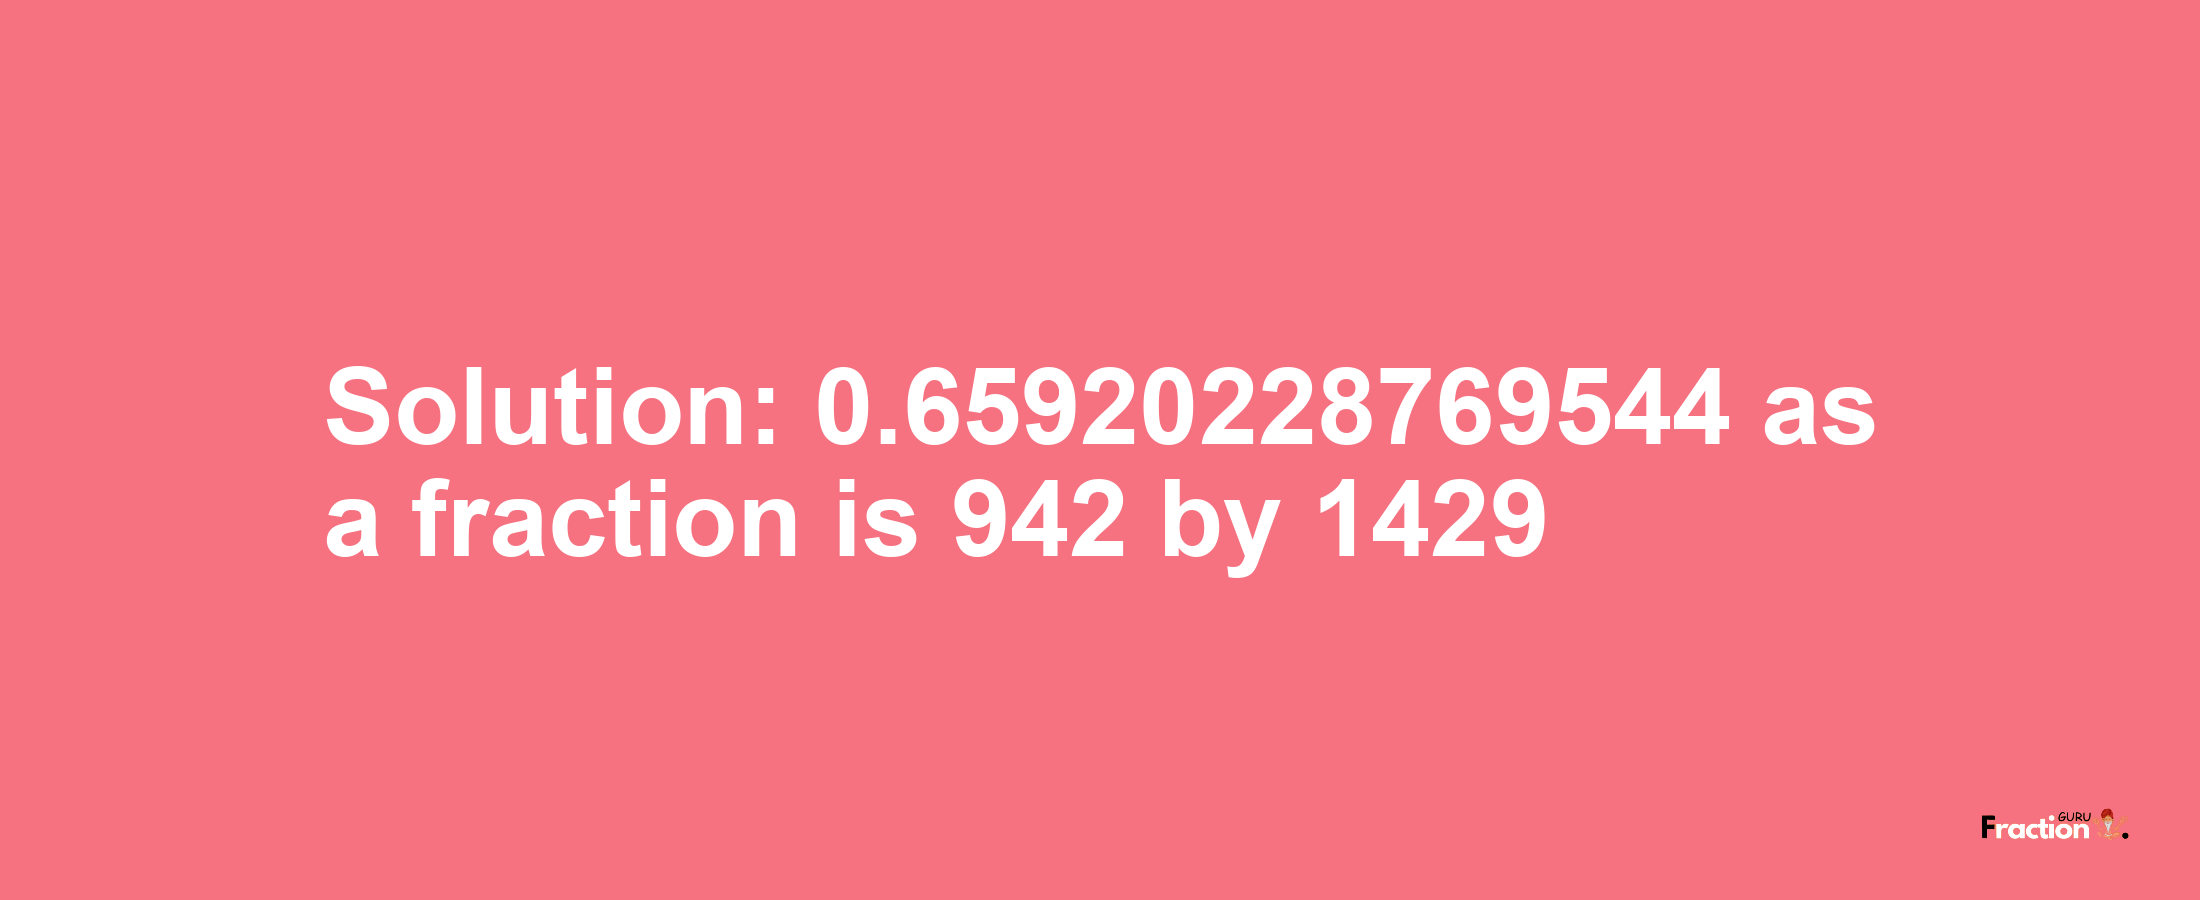 Solution:0.65920228769544 as a fraction is 942/1429